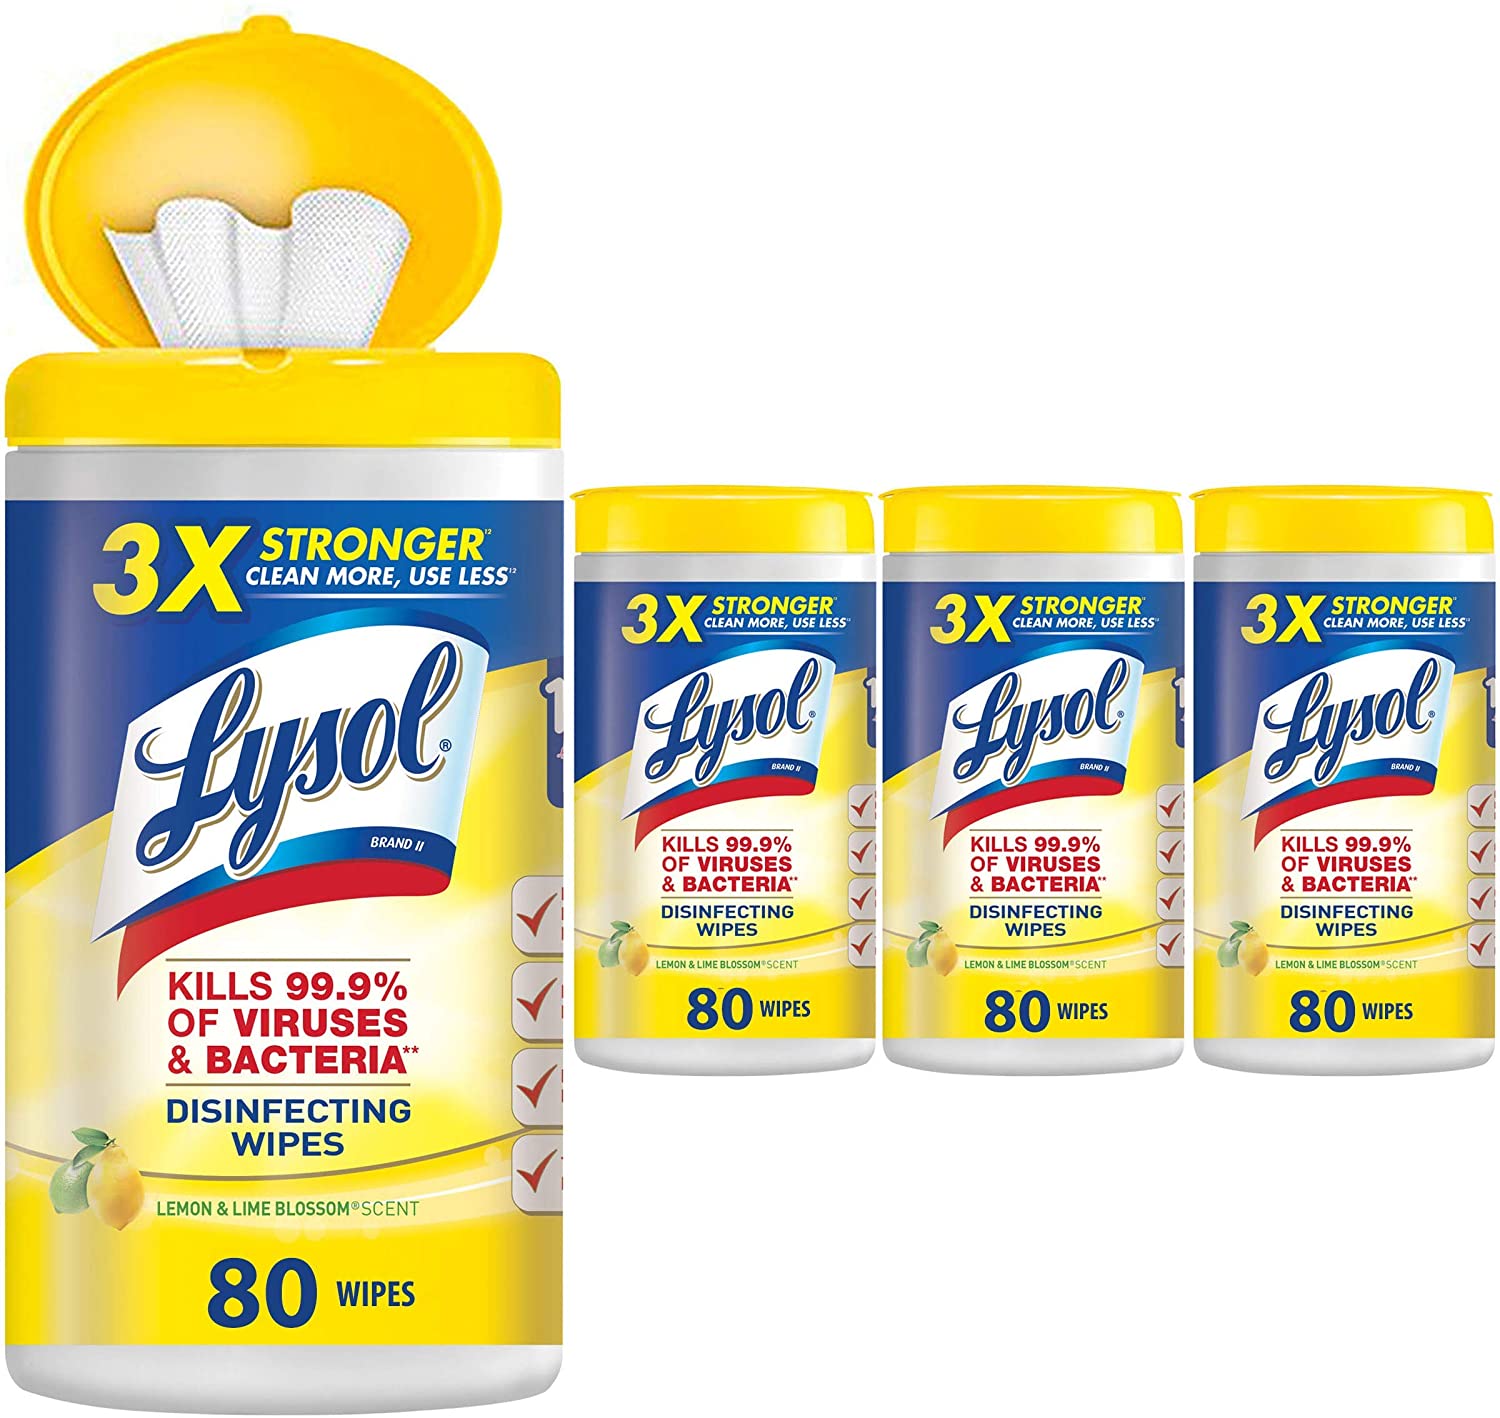 Lysol Disinfecting Wipes 320 cts $9.43 shipped